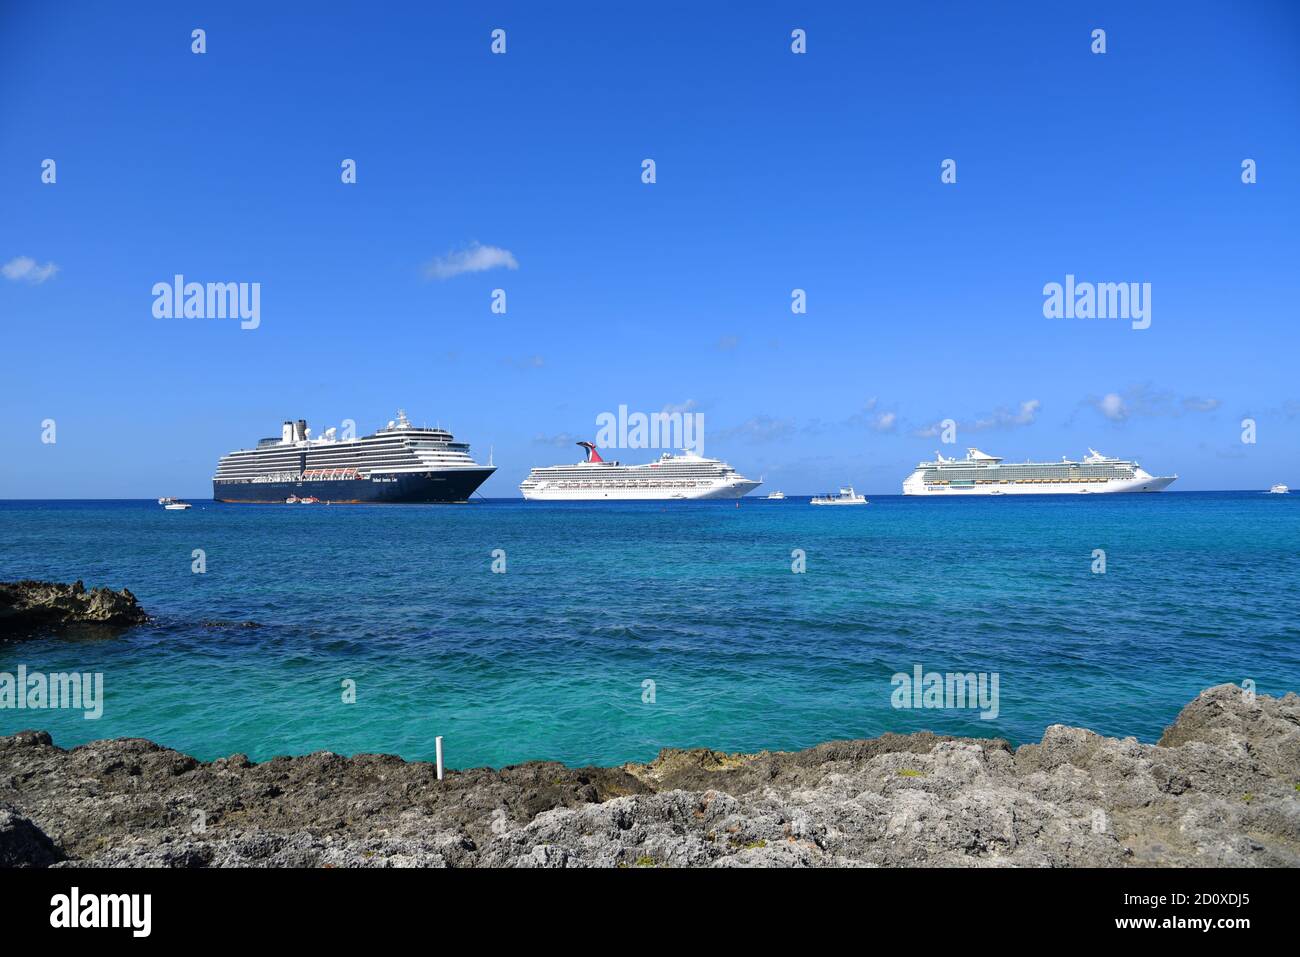 Cruise ships Holland American Line Zuiderdam, Carnival Victory and Royal Caribbean Independence of the Seas in George Town, Cayman Islands. Stock Photo